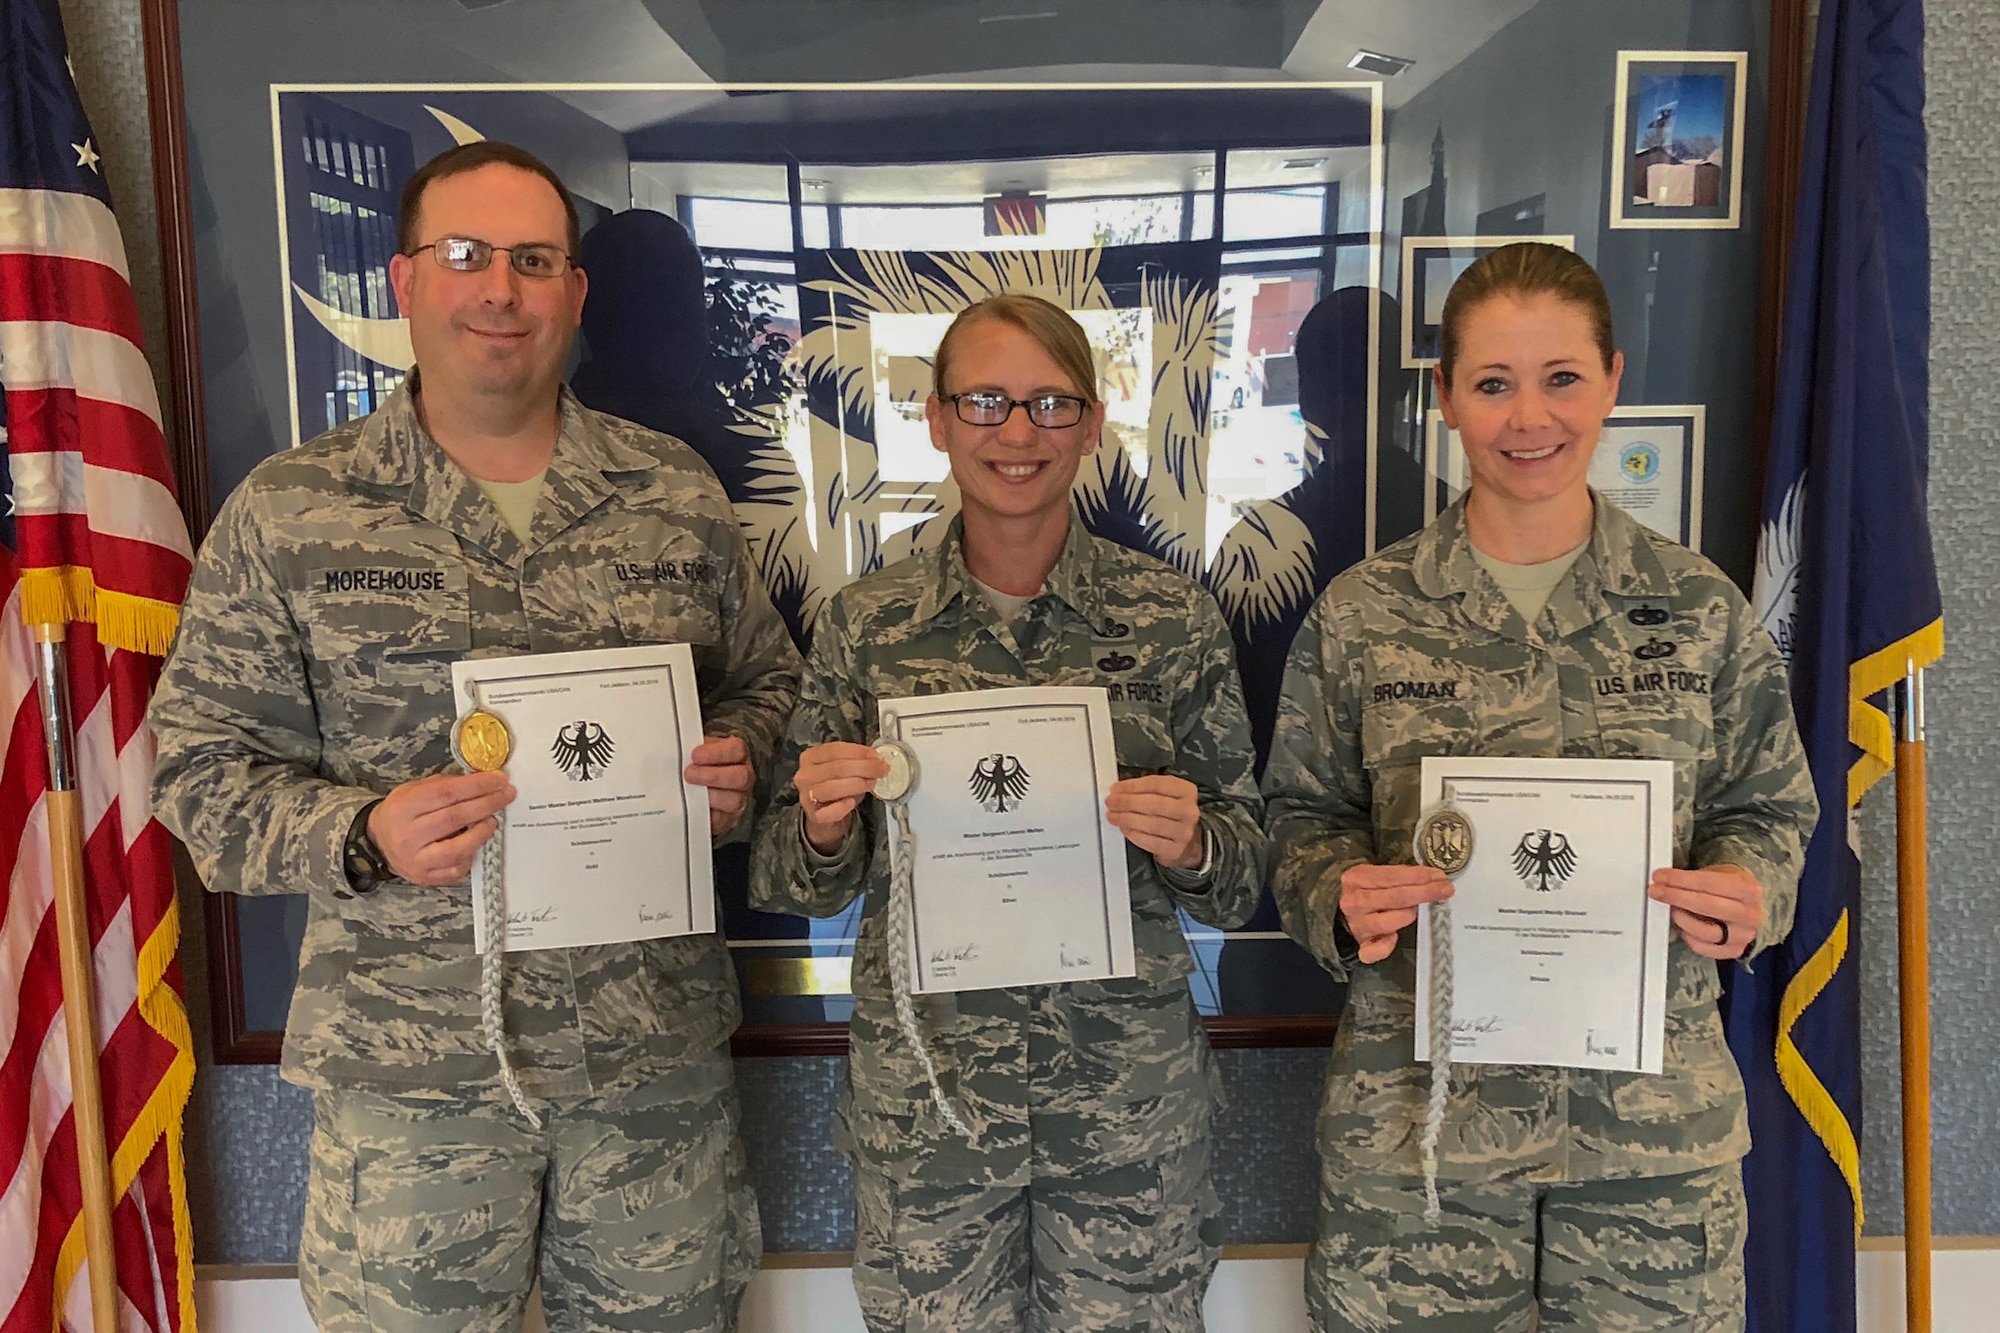 U.S. Air Force Senior Master Sgt. Matthew Morehouse, Master Sgt. Leeann Melton and Master Sgt. Wendy Broman, assigned to the South Carolina Air National Guard's 169th Fighter Wing, recieved the Schutzenschnur Badge for demonstrating profeciency in firing German weapons, March 7, 2018 at McEntire Joint National Guard Base, S.C. Several other service members were chosen to participate in a specialized training opportunity to work with German soldiers. They learned how to fire a German rifle, pistol and machine gun. (U.S. Air National Guard courtesy photo)